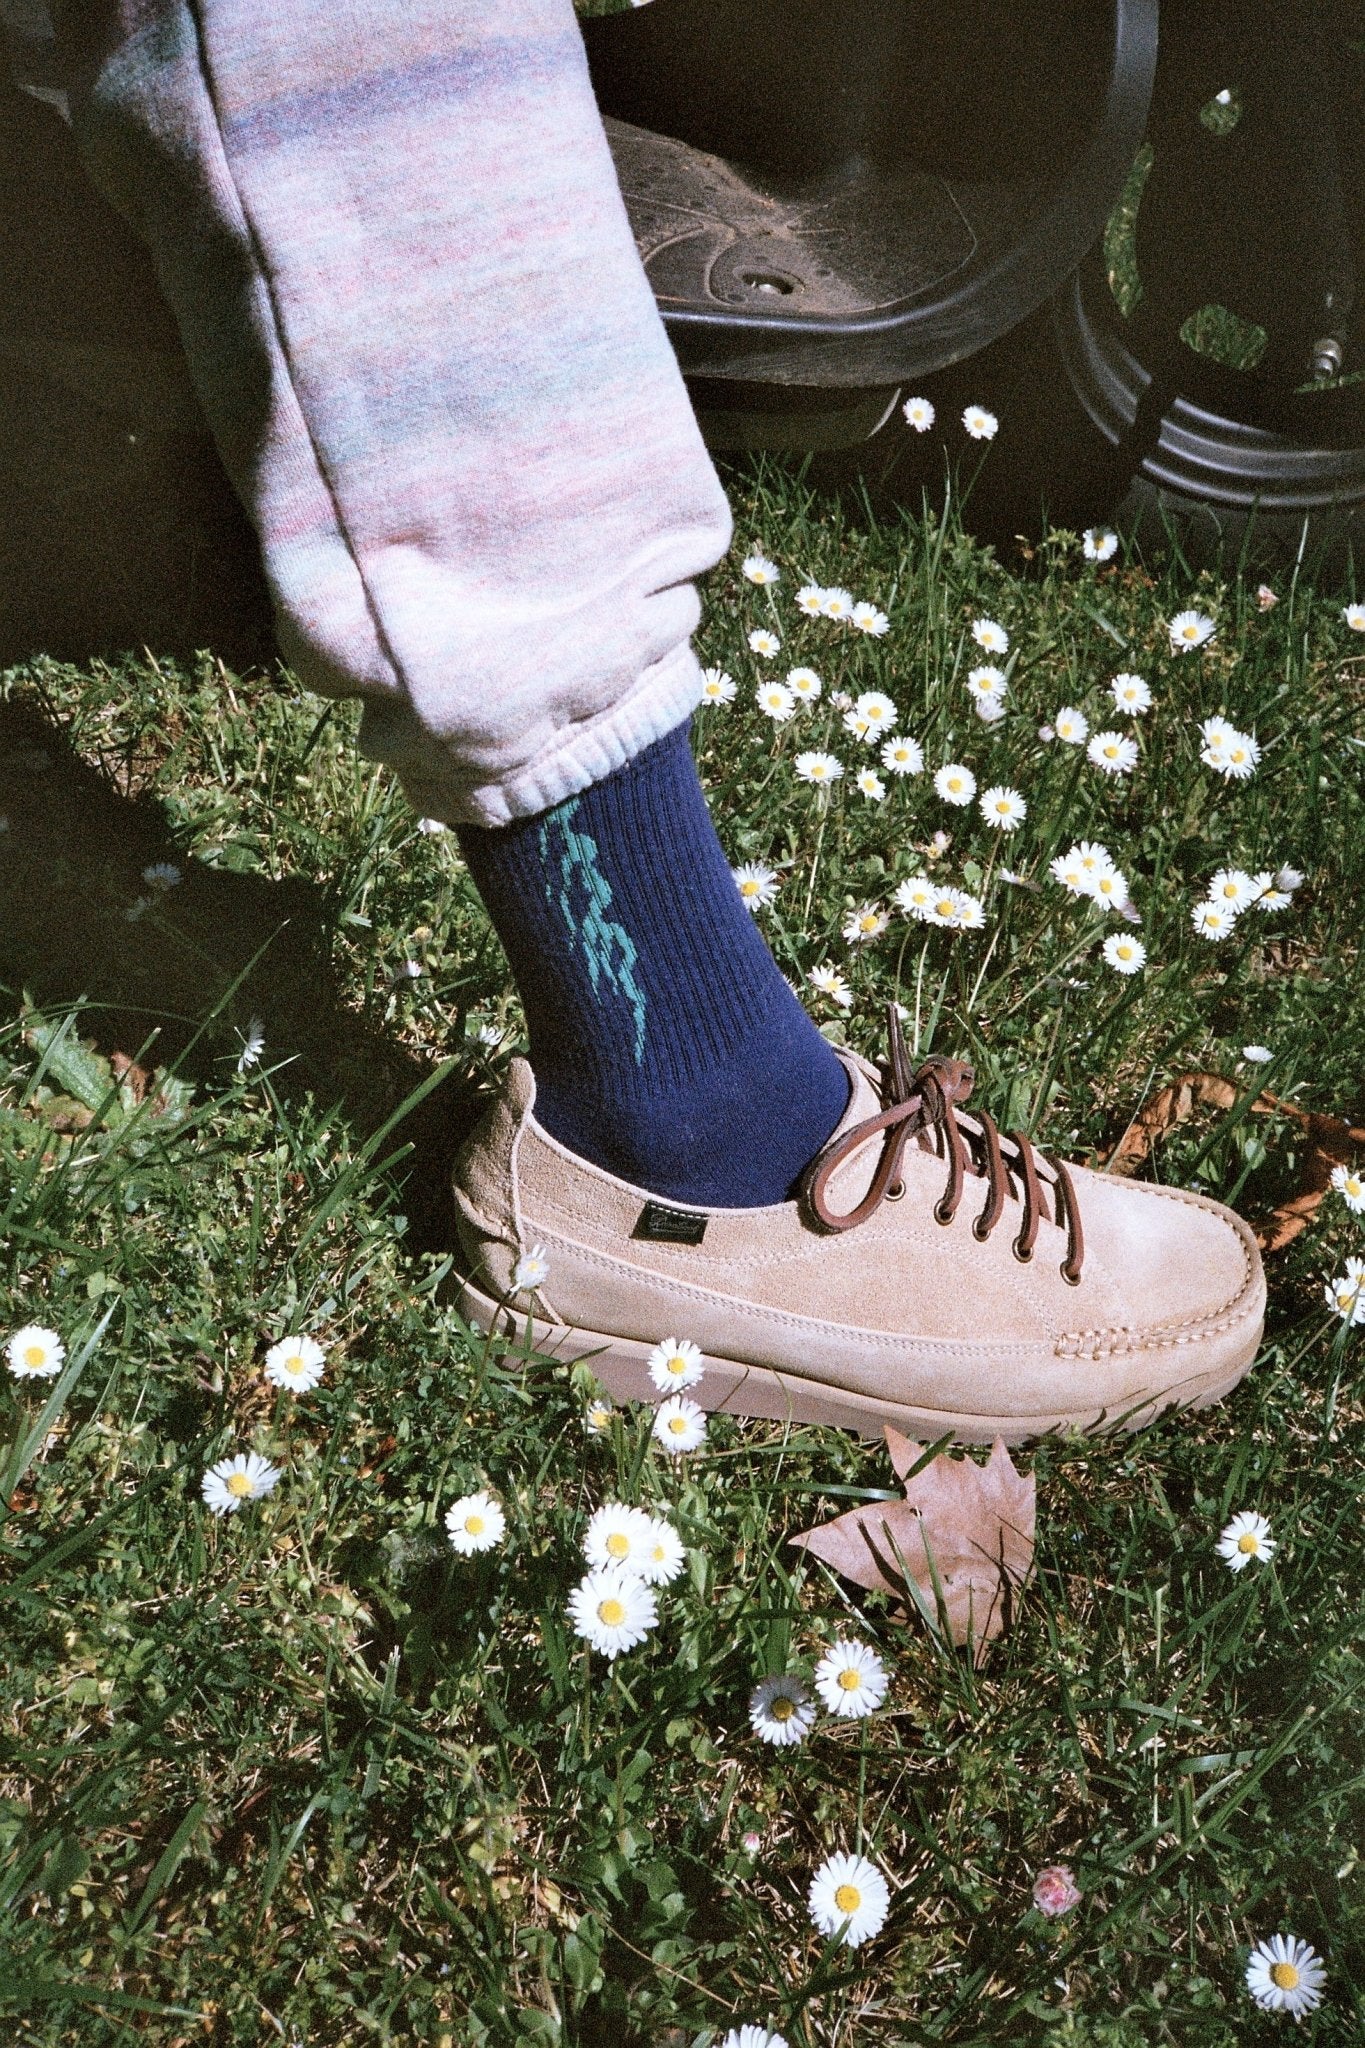 A person wearing blue Flame Crew Socks together with beige shoes